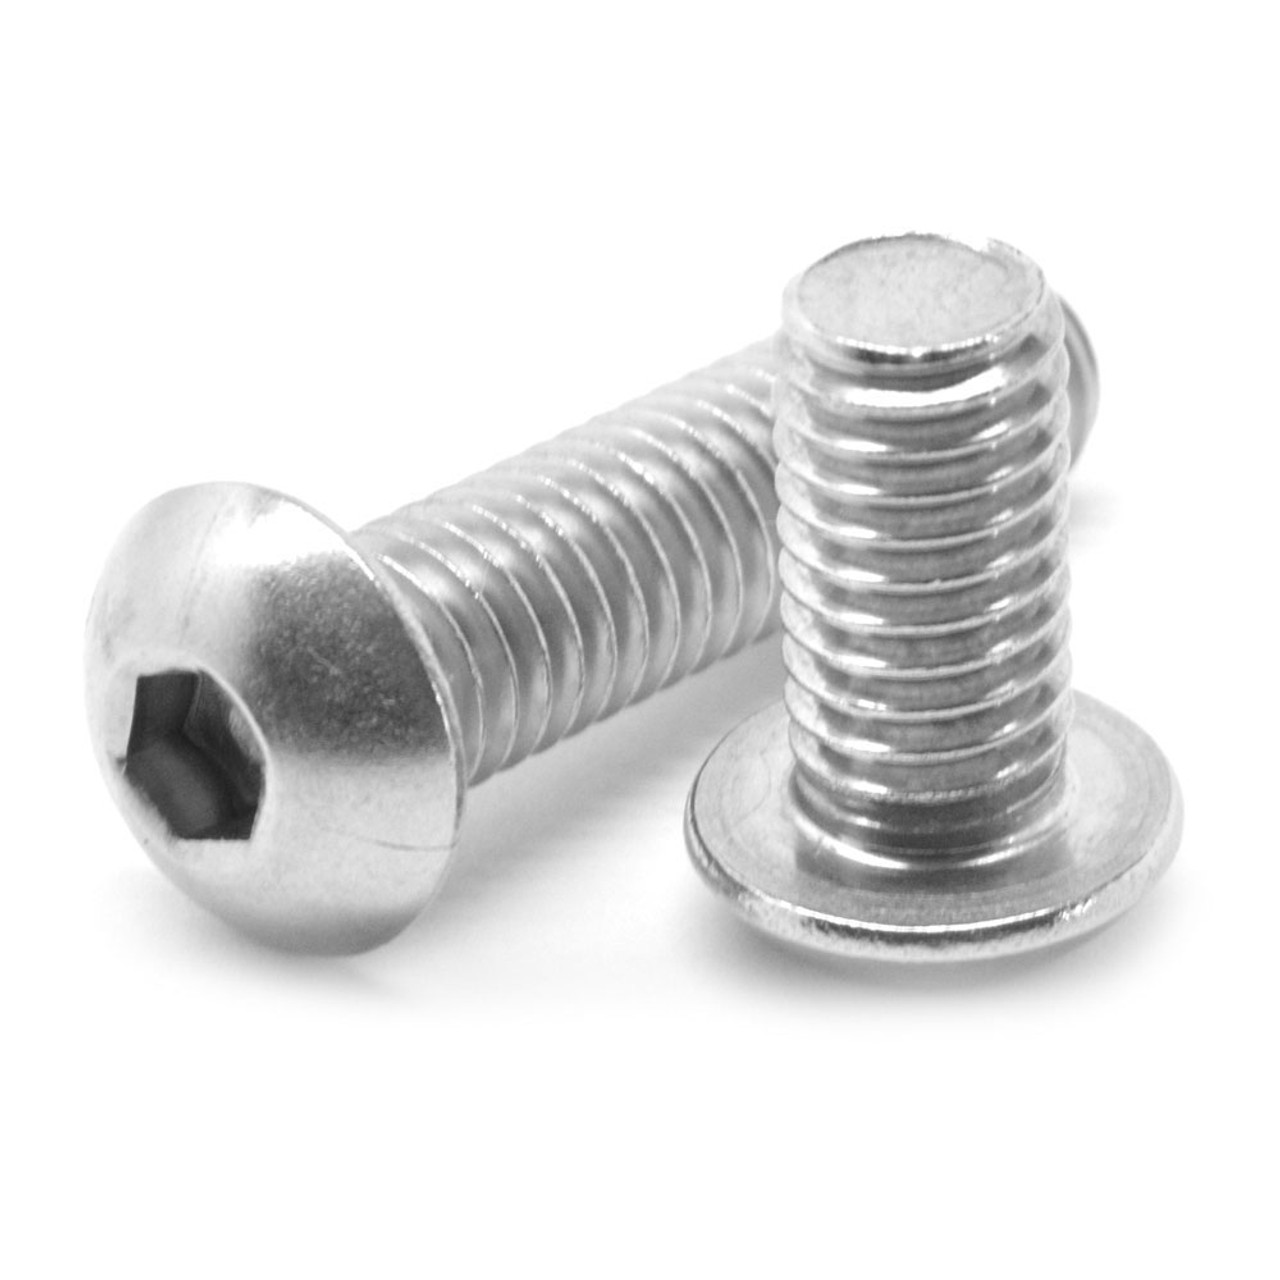 M3 x 0.50 x 18 MM (FT) Coarse Thread ISO 7380 Socket Button Head Cap Screw Stainless Steel 18-8